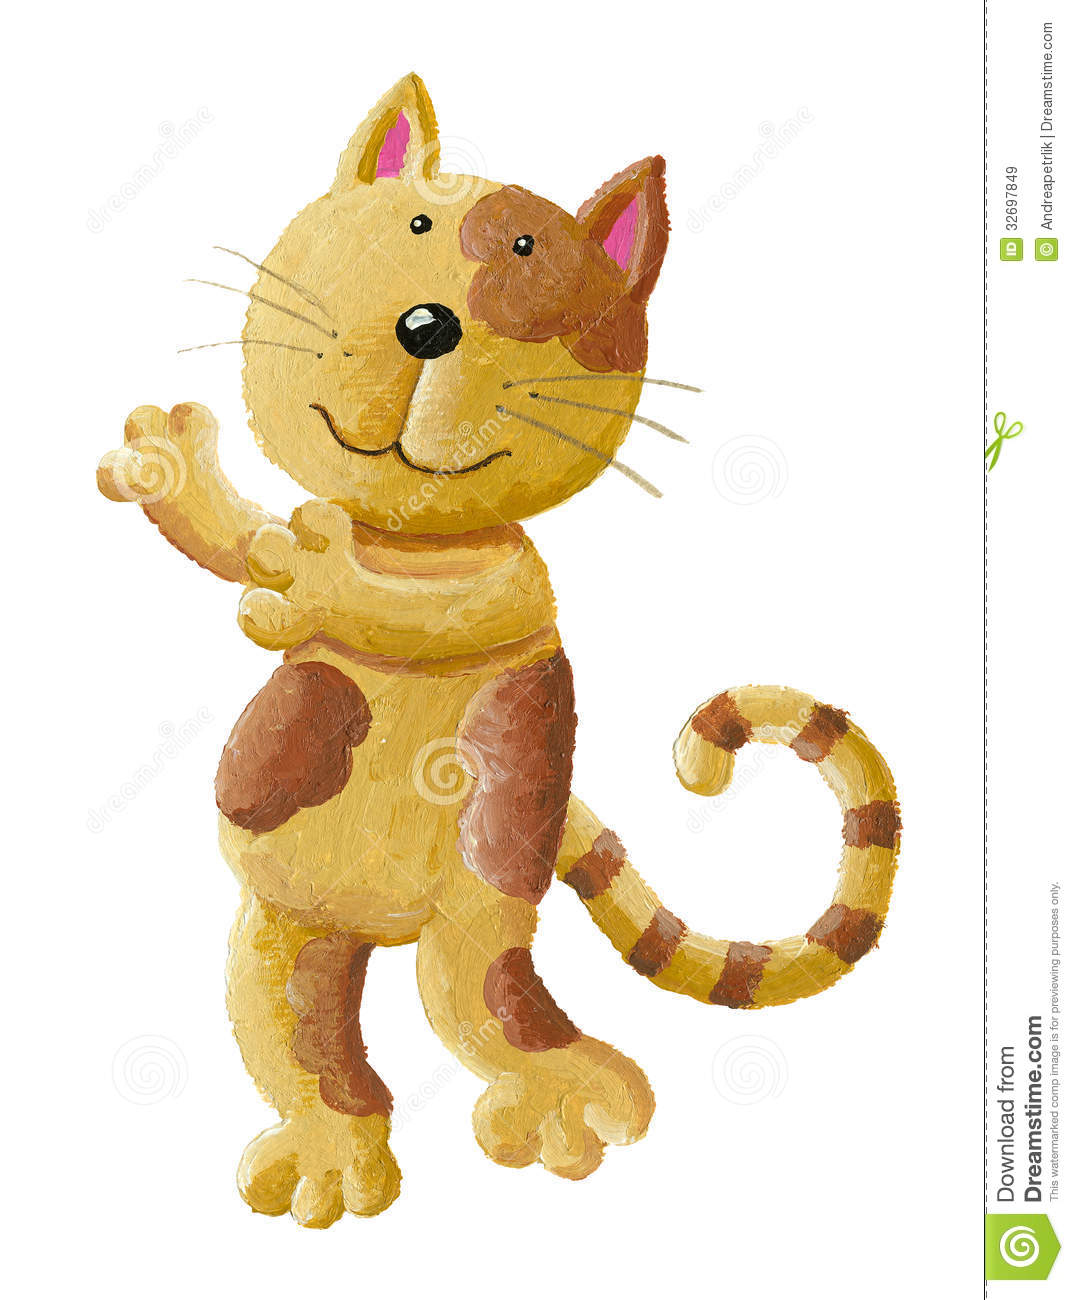 Cut Cat Giving Hug Royalty Free Stock Images   Image  32697849